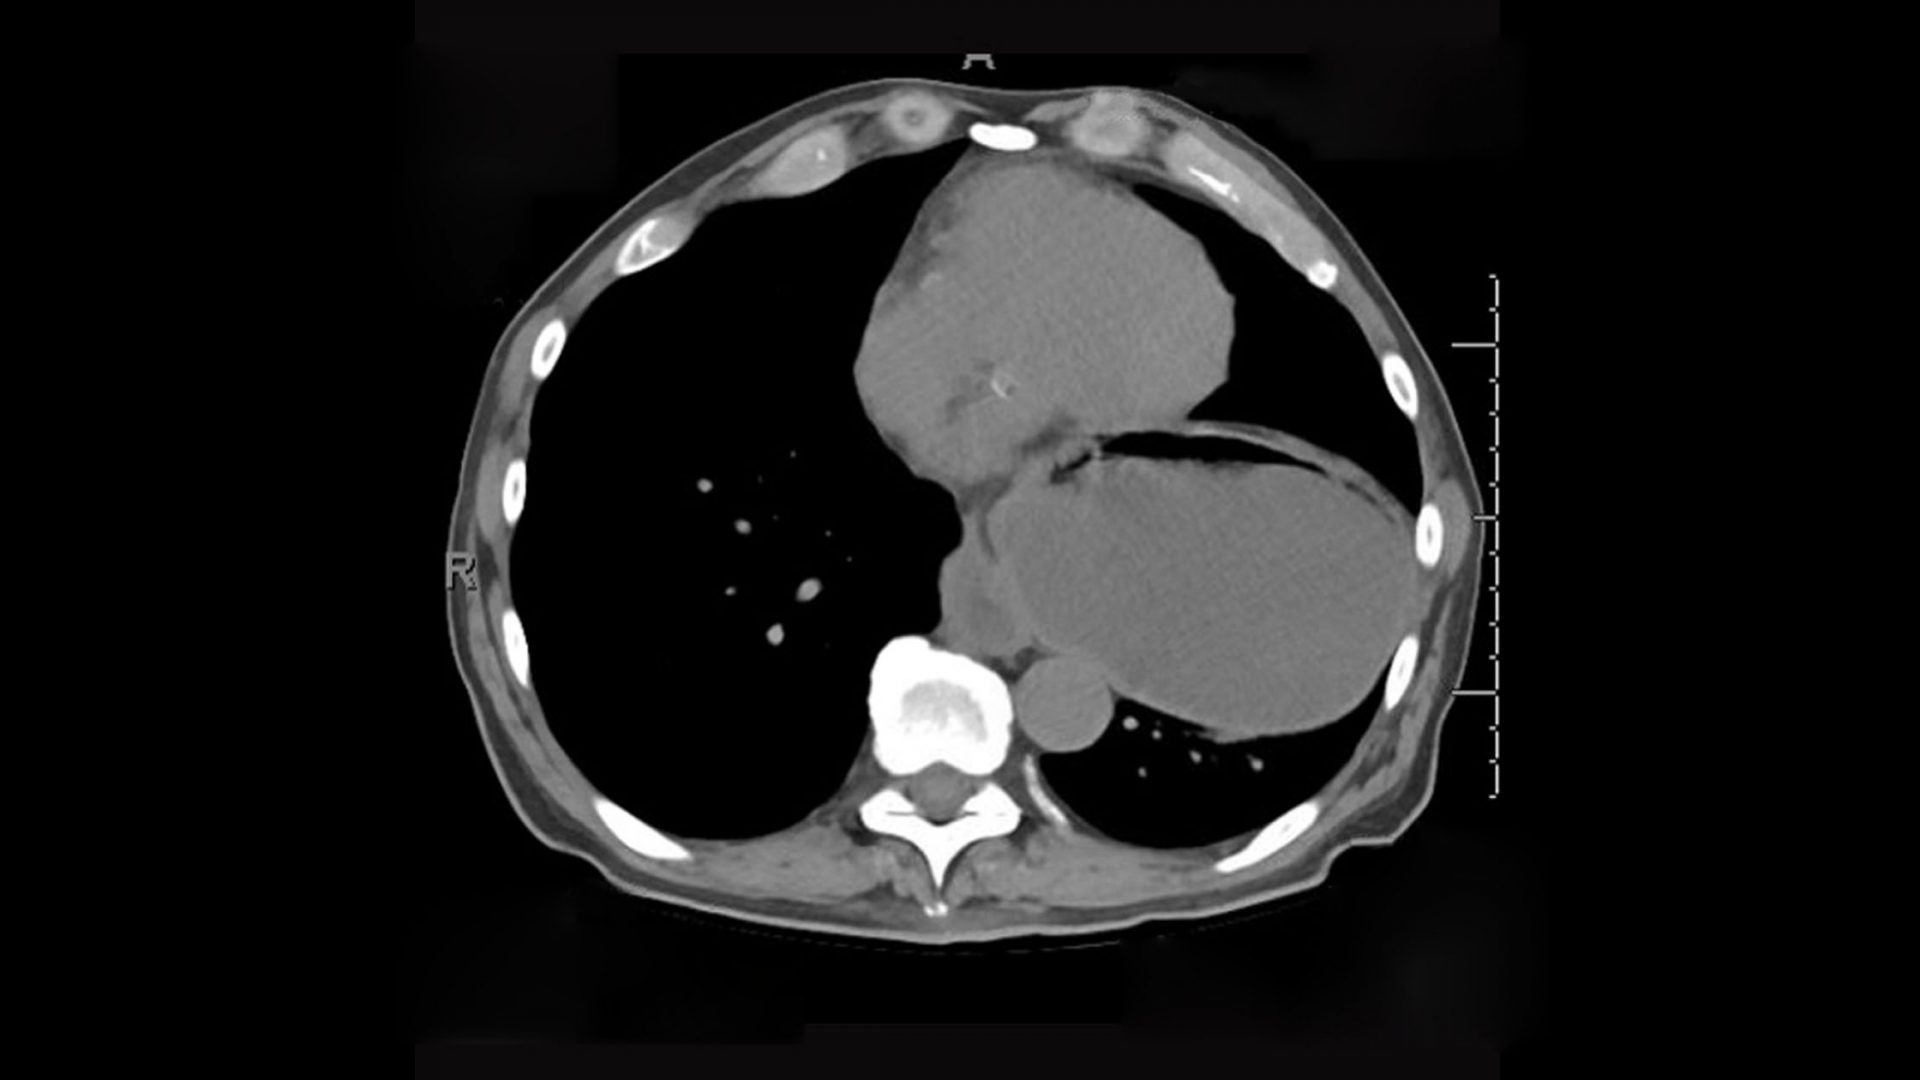 Axial View of CT Scan Showing Large Intrathoracic Stomach